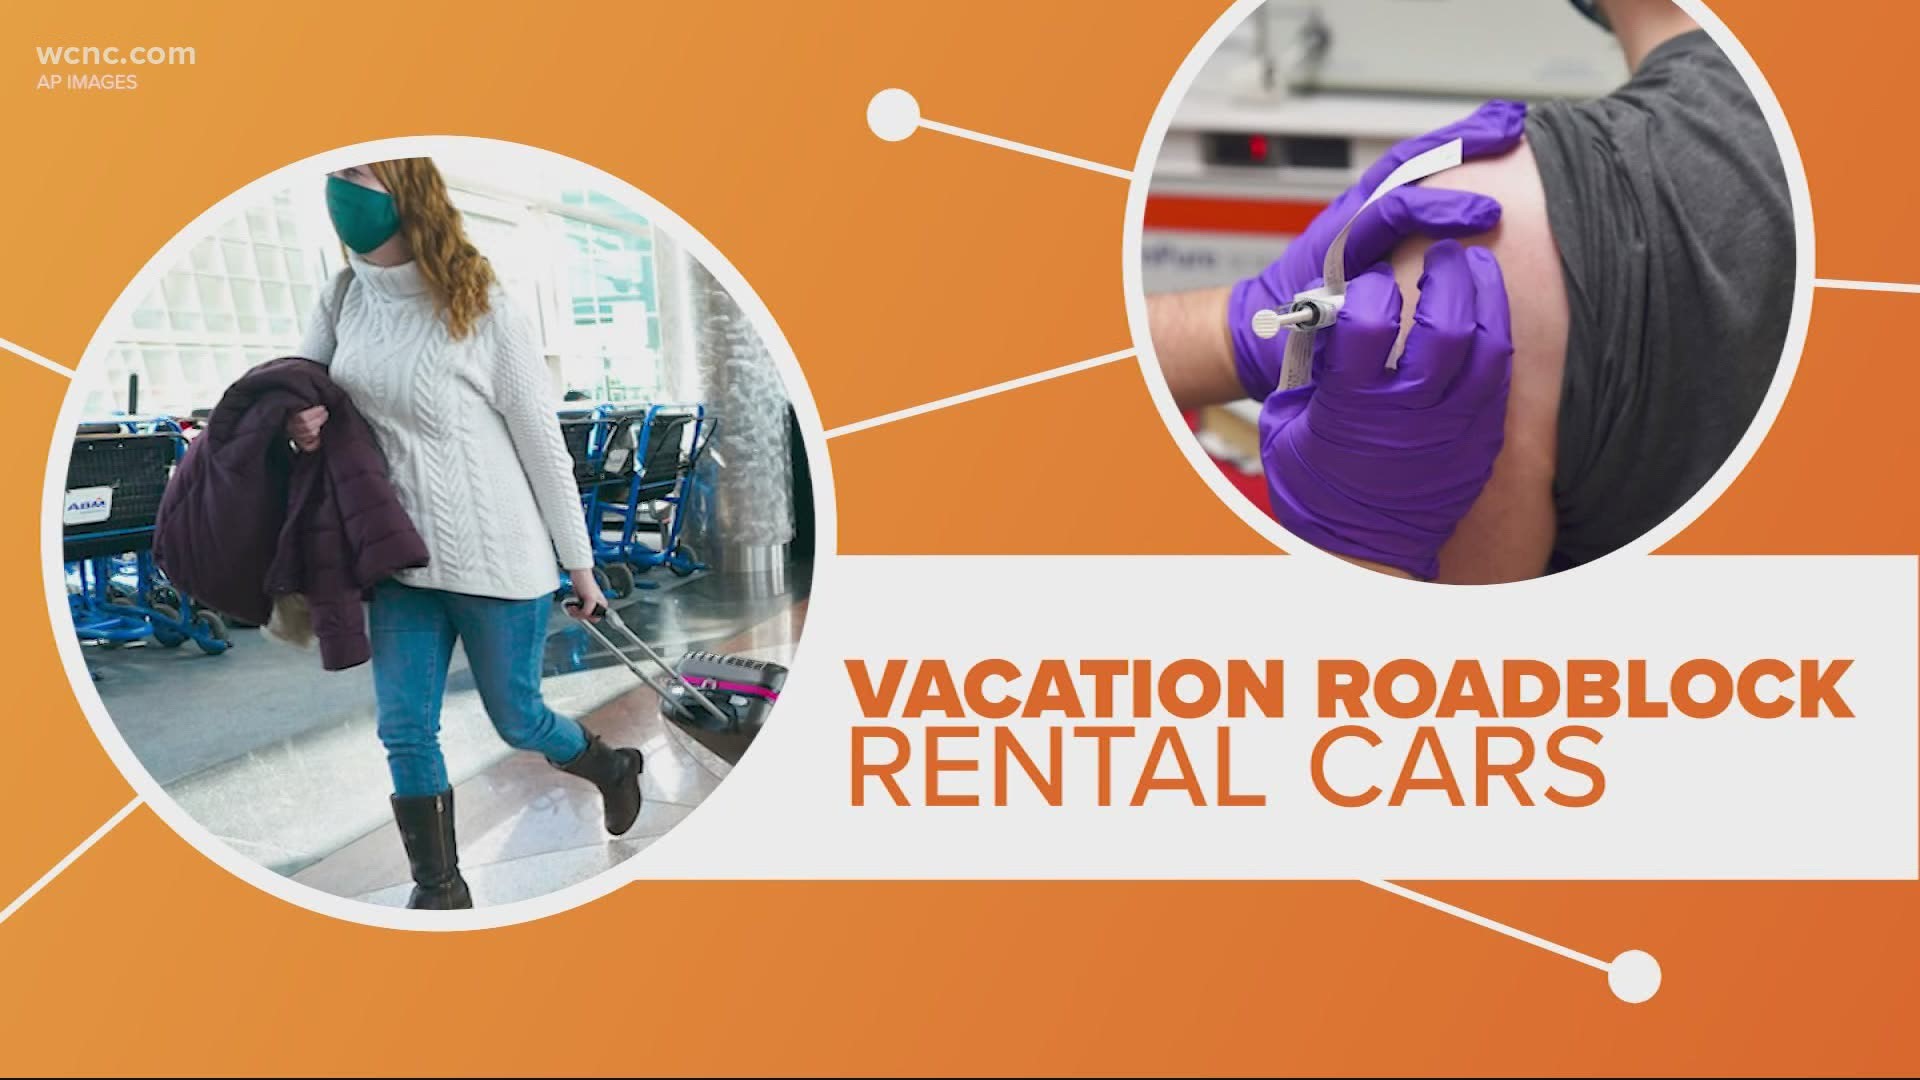 If you're planning a post-vaccine vacation, experts say you better book a rental car now. Not only are they hard to come by, they're getting more expensive.